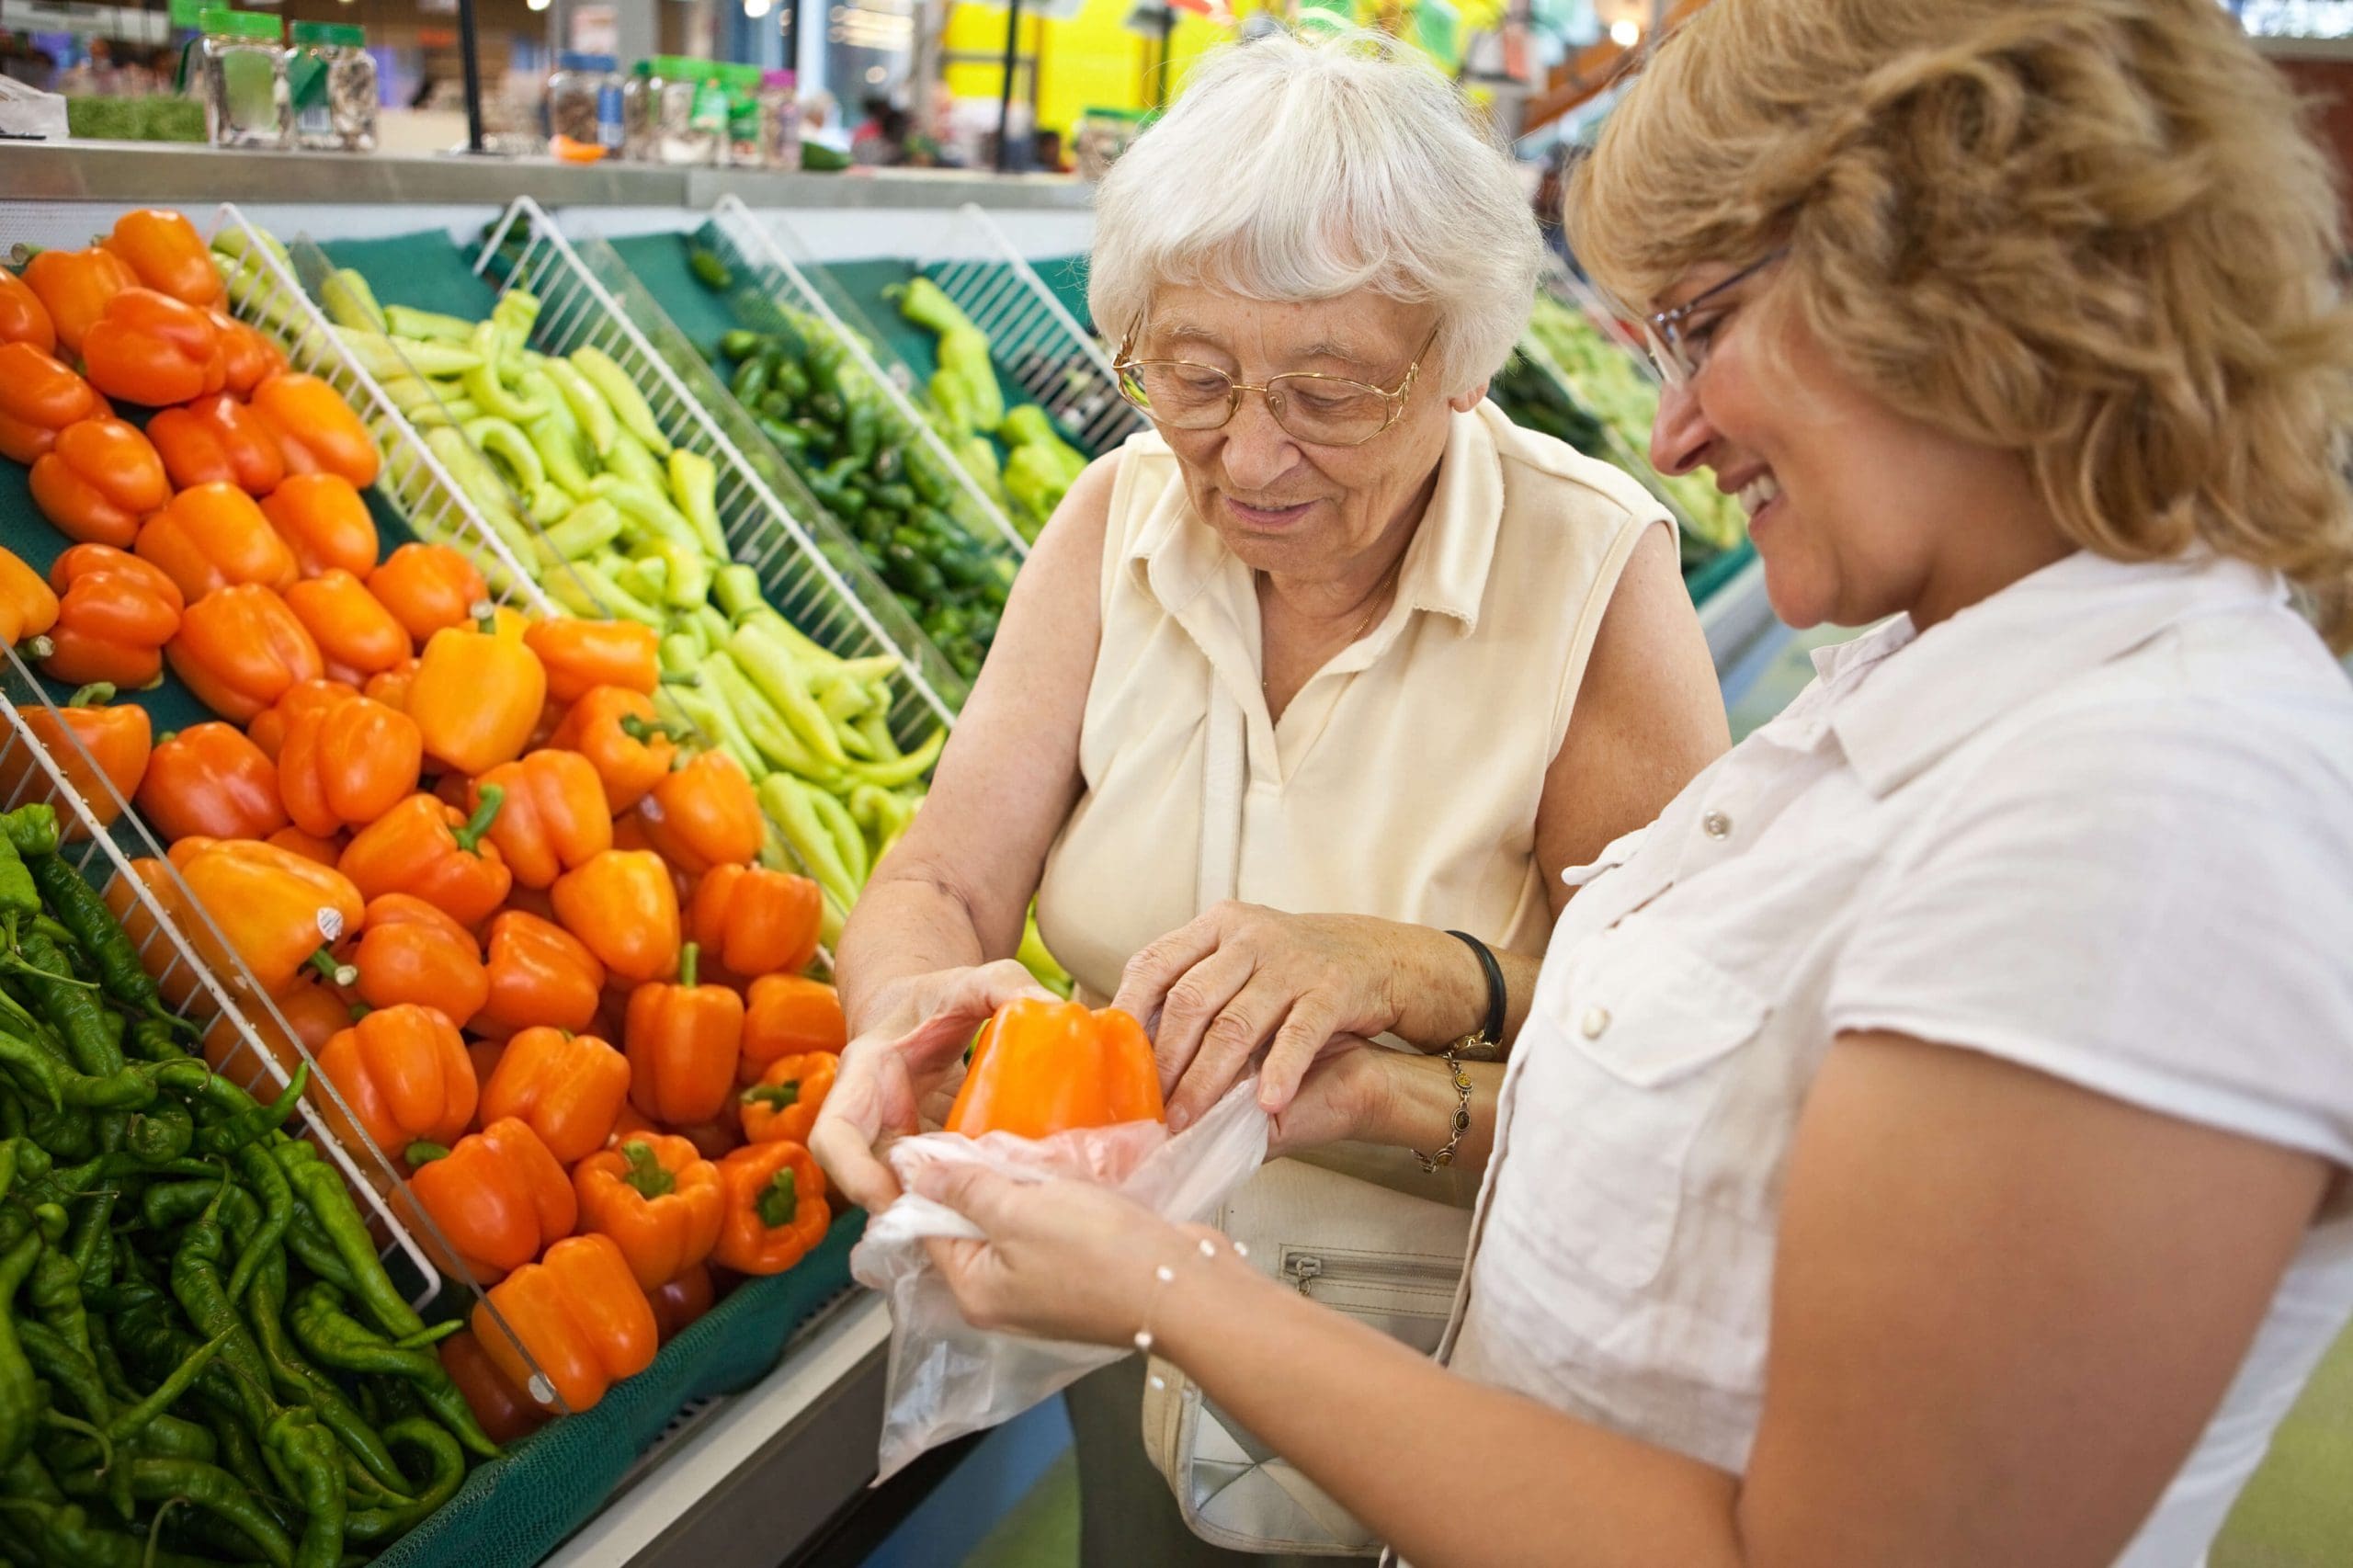 Volunteer lending a helping hand with shopping to a senior (focus on senior)